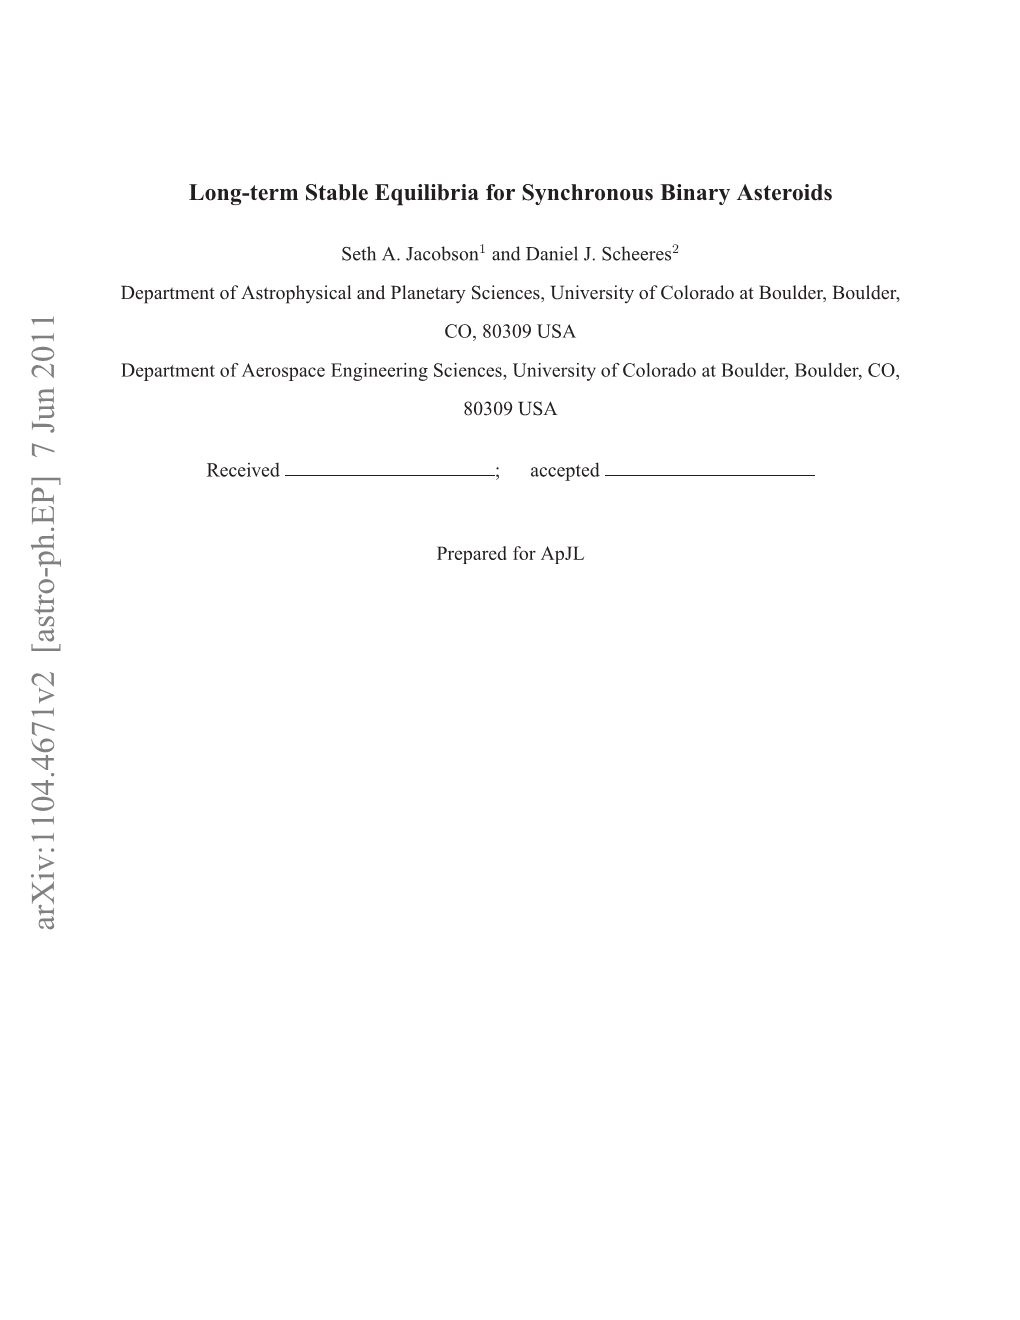 Long-Term Stable Equilibria for Synchronous Binary Asteroids